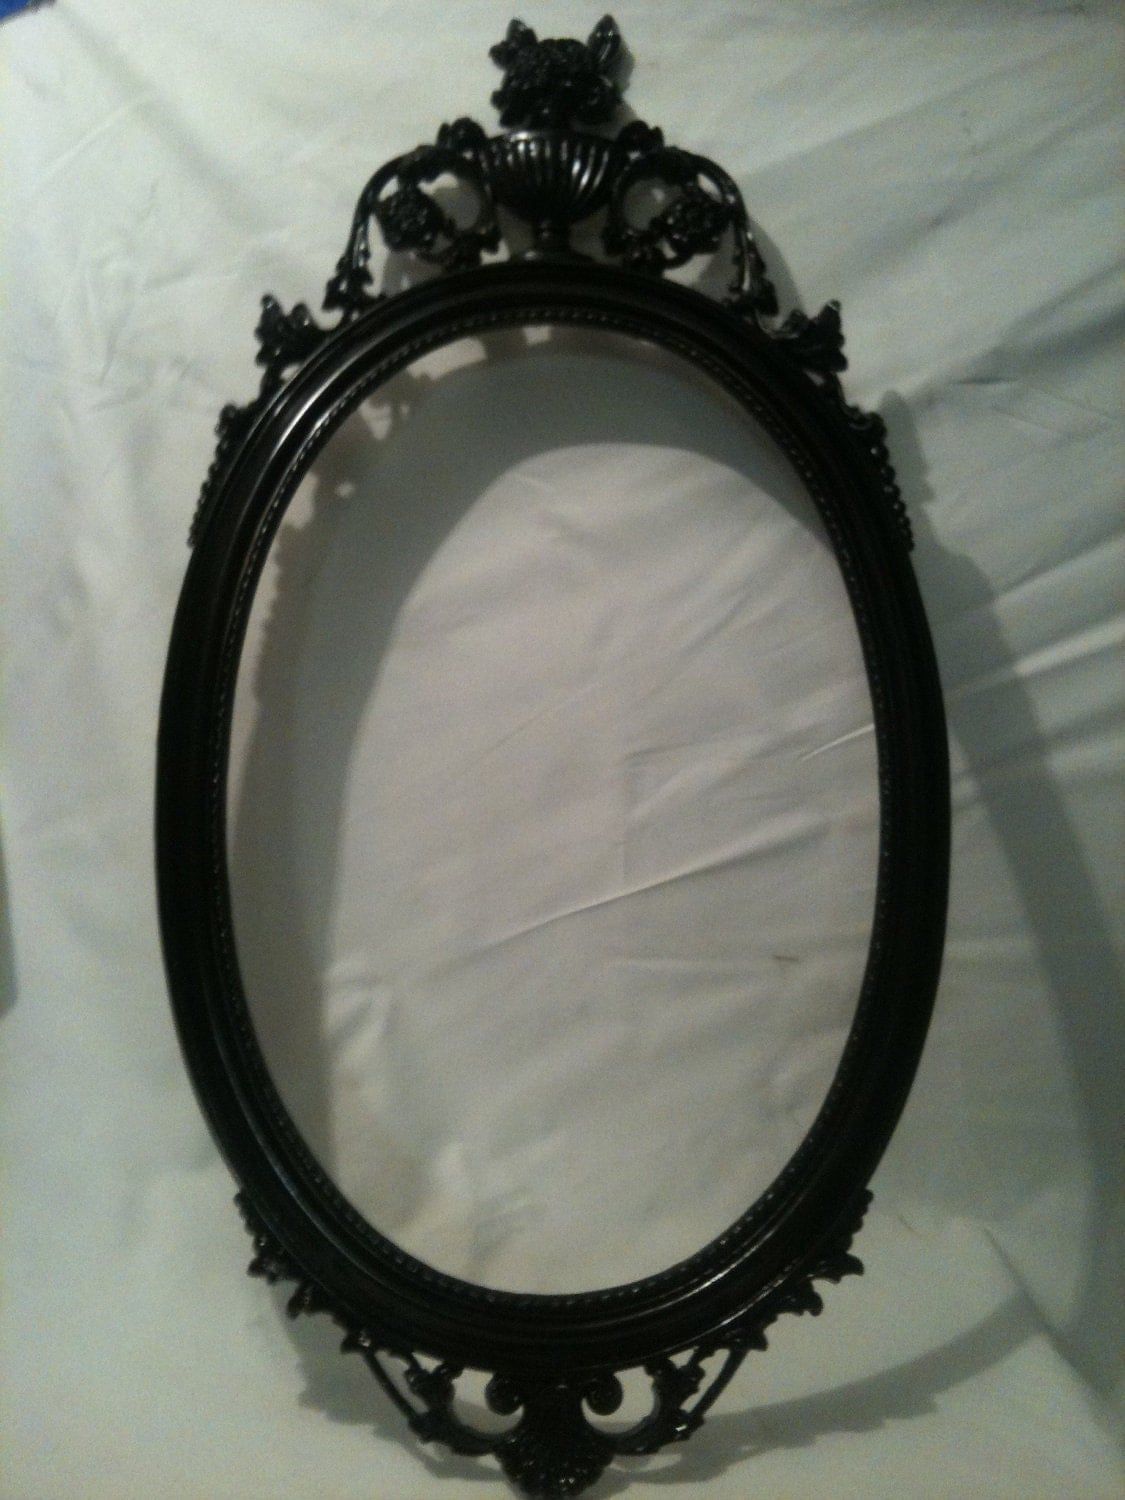 Gloss Black Oval Picture Frame Mirror Shabby Chic Baroque Regarding Black Oval Cut Wall Mirrors (View 7 of 15)